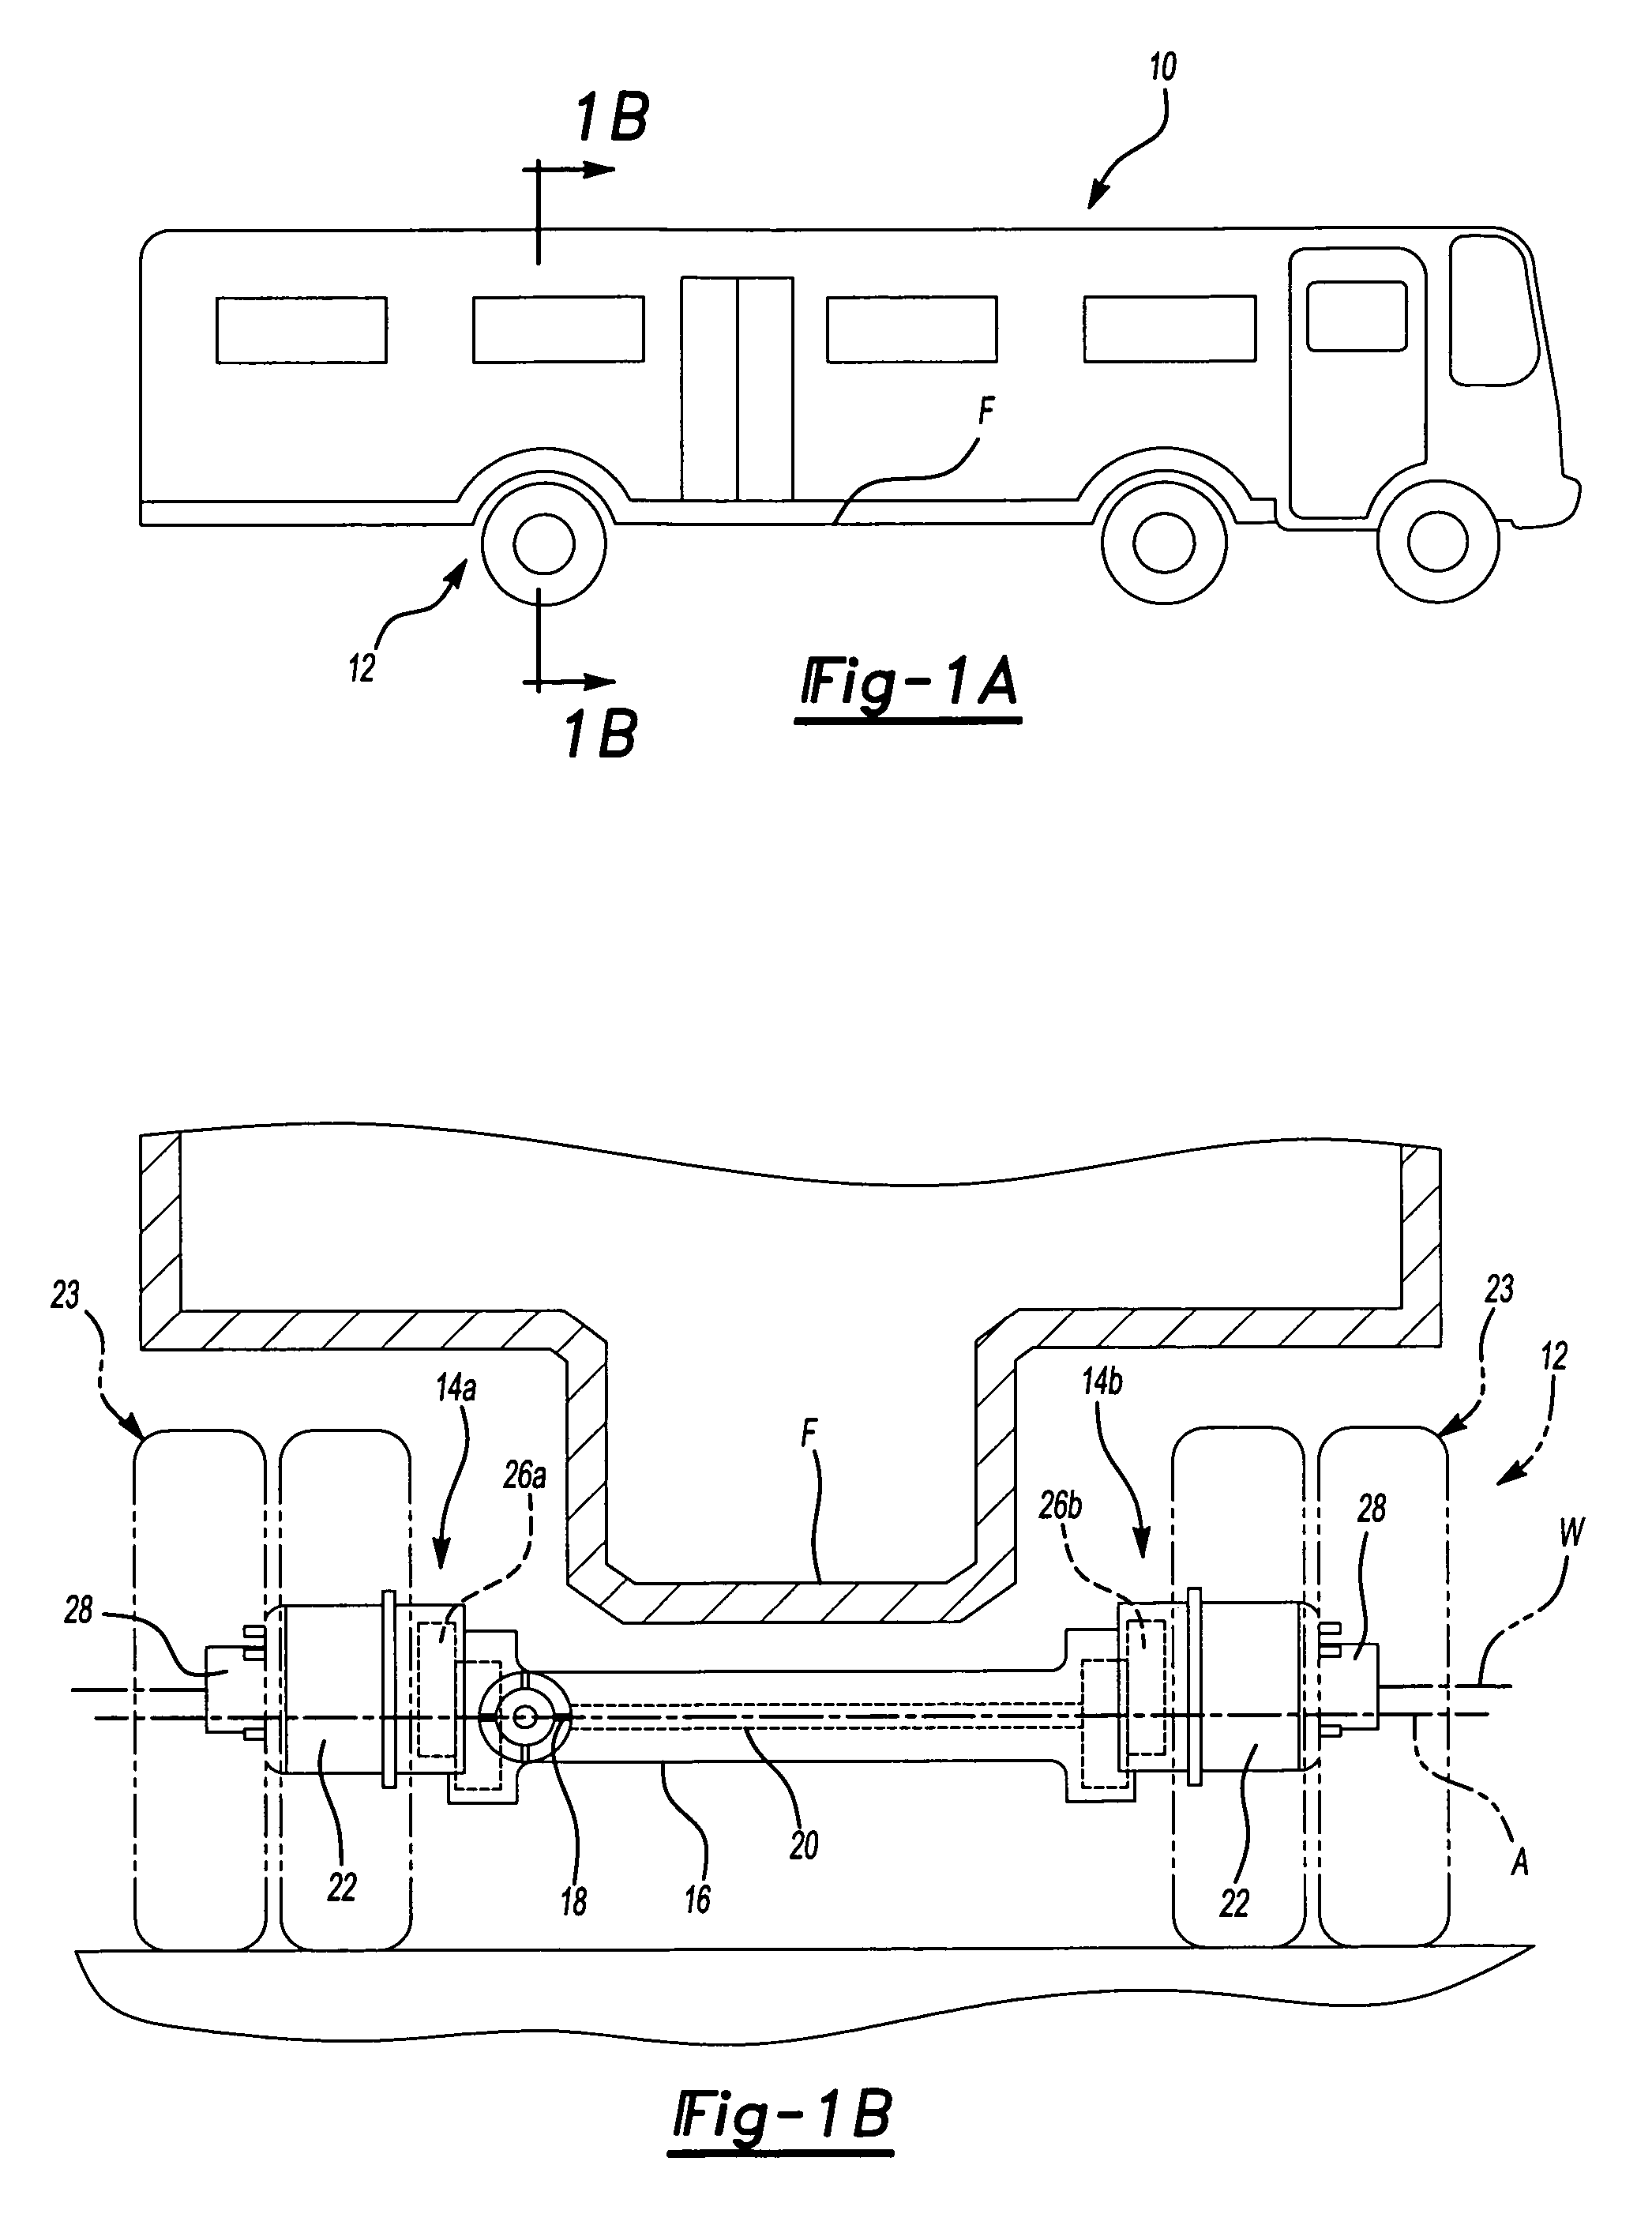 Inverted portal axle configuration for a low floor vehicle